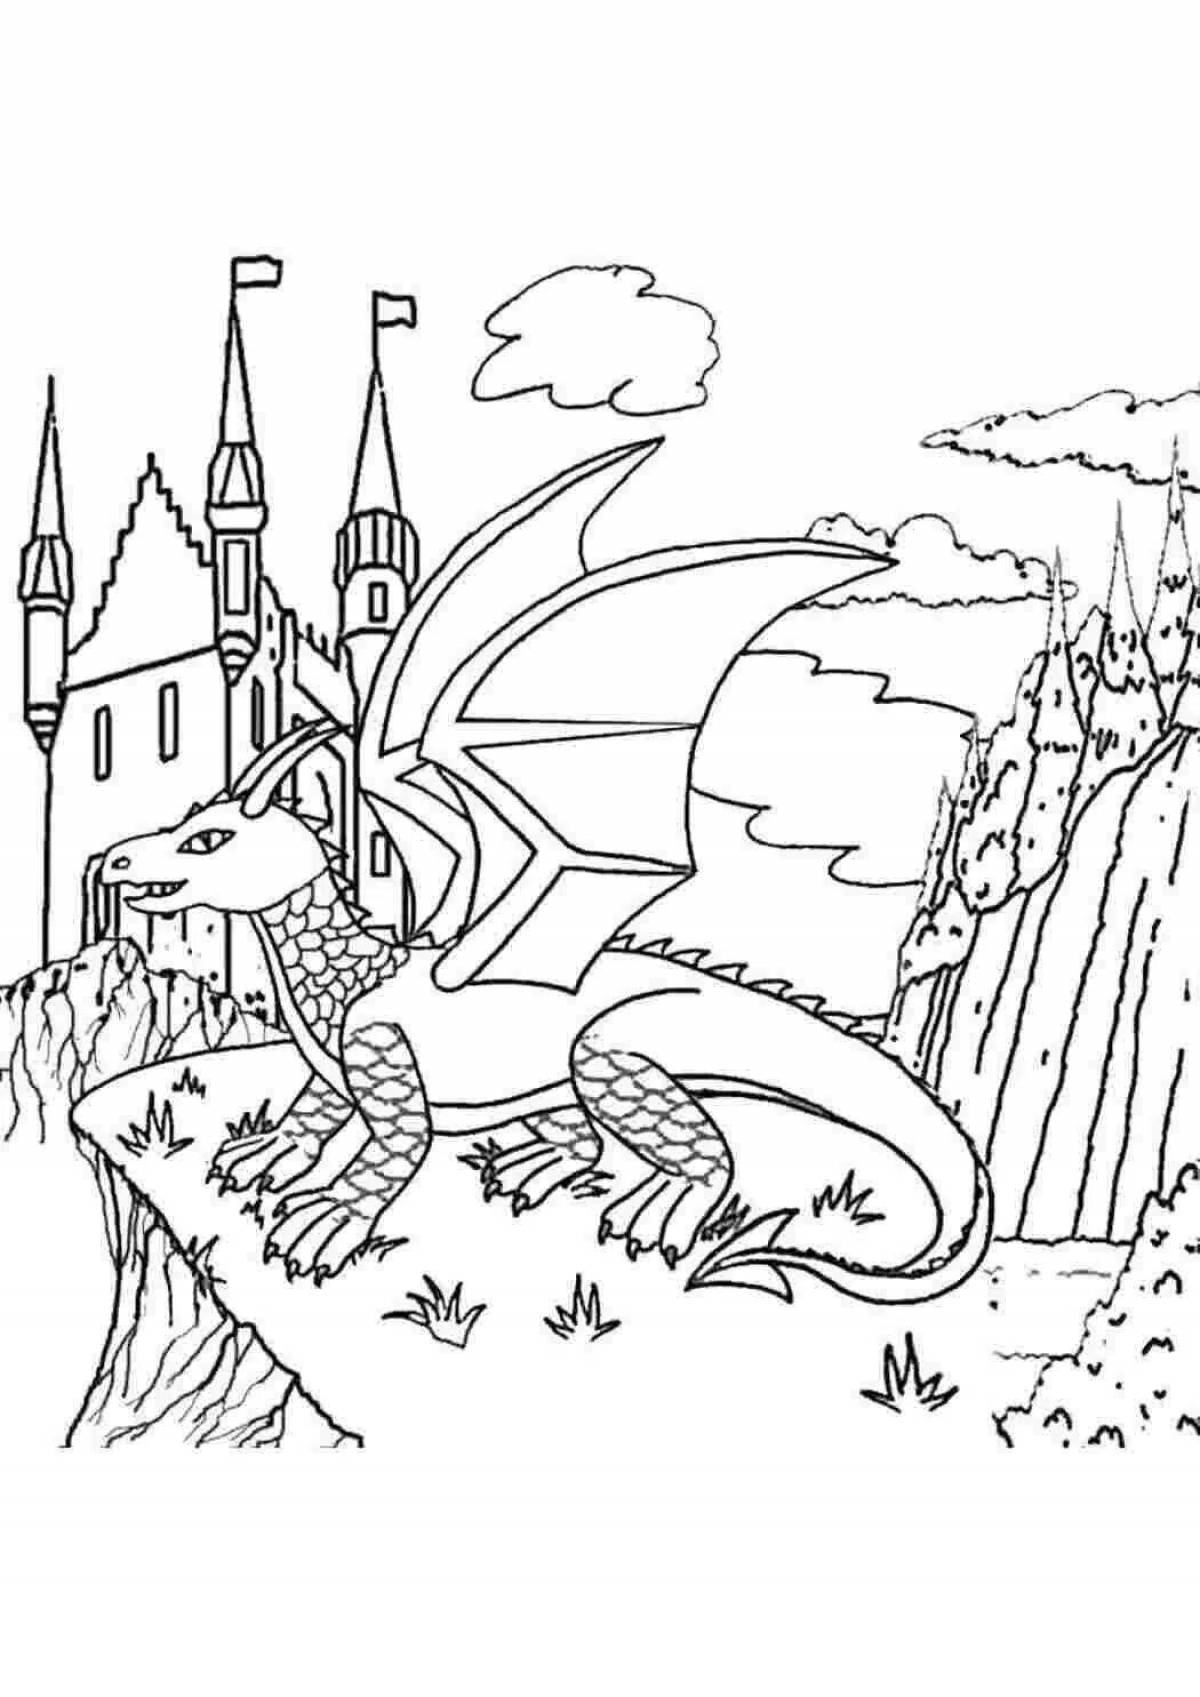 Fabulous coloring pages of dragons of the nine worlds